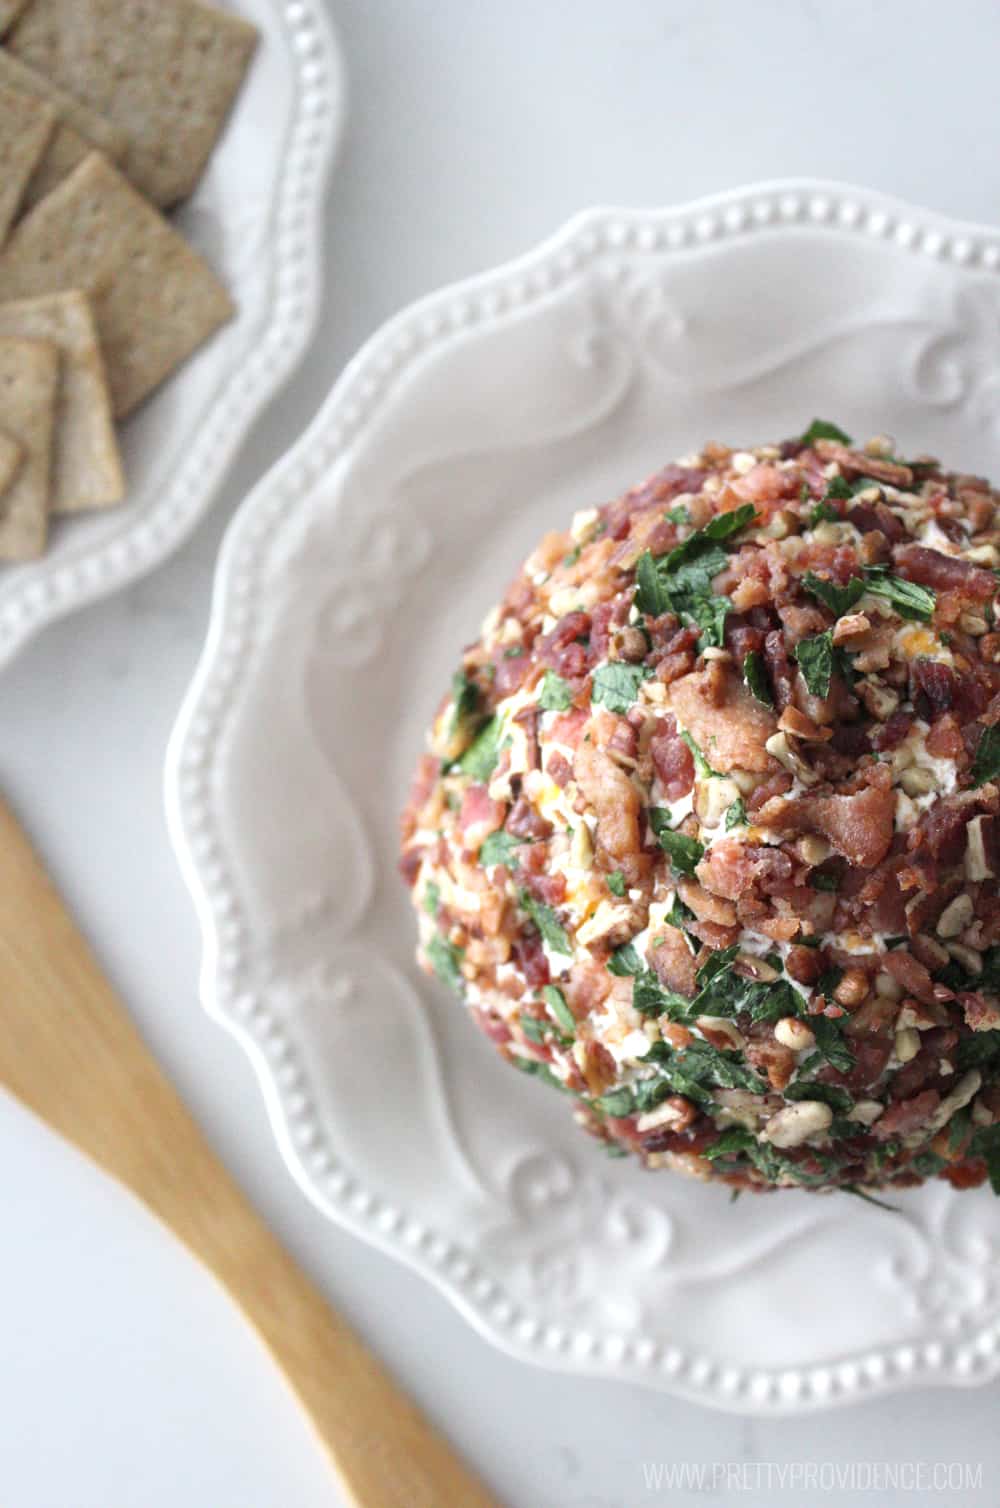 Not only is this cheese ball freaking delicious but it is also beautiful and easy to make! The perfect appetizer to bring to any get together! 